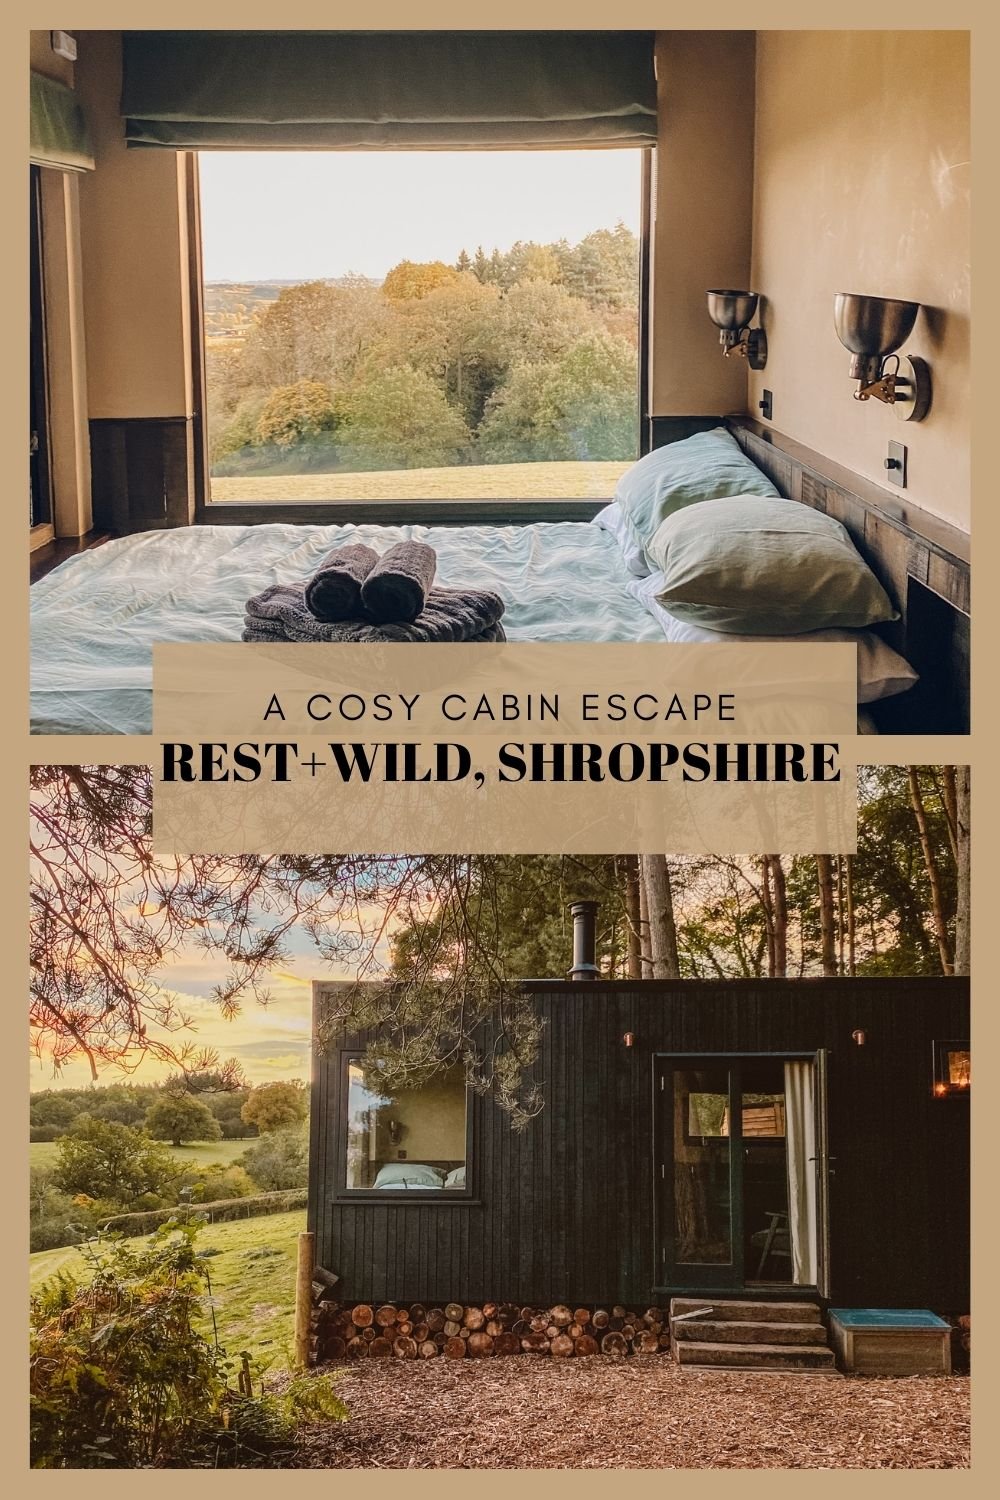 A stay at Rest + Wild, Shropshire